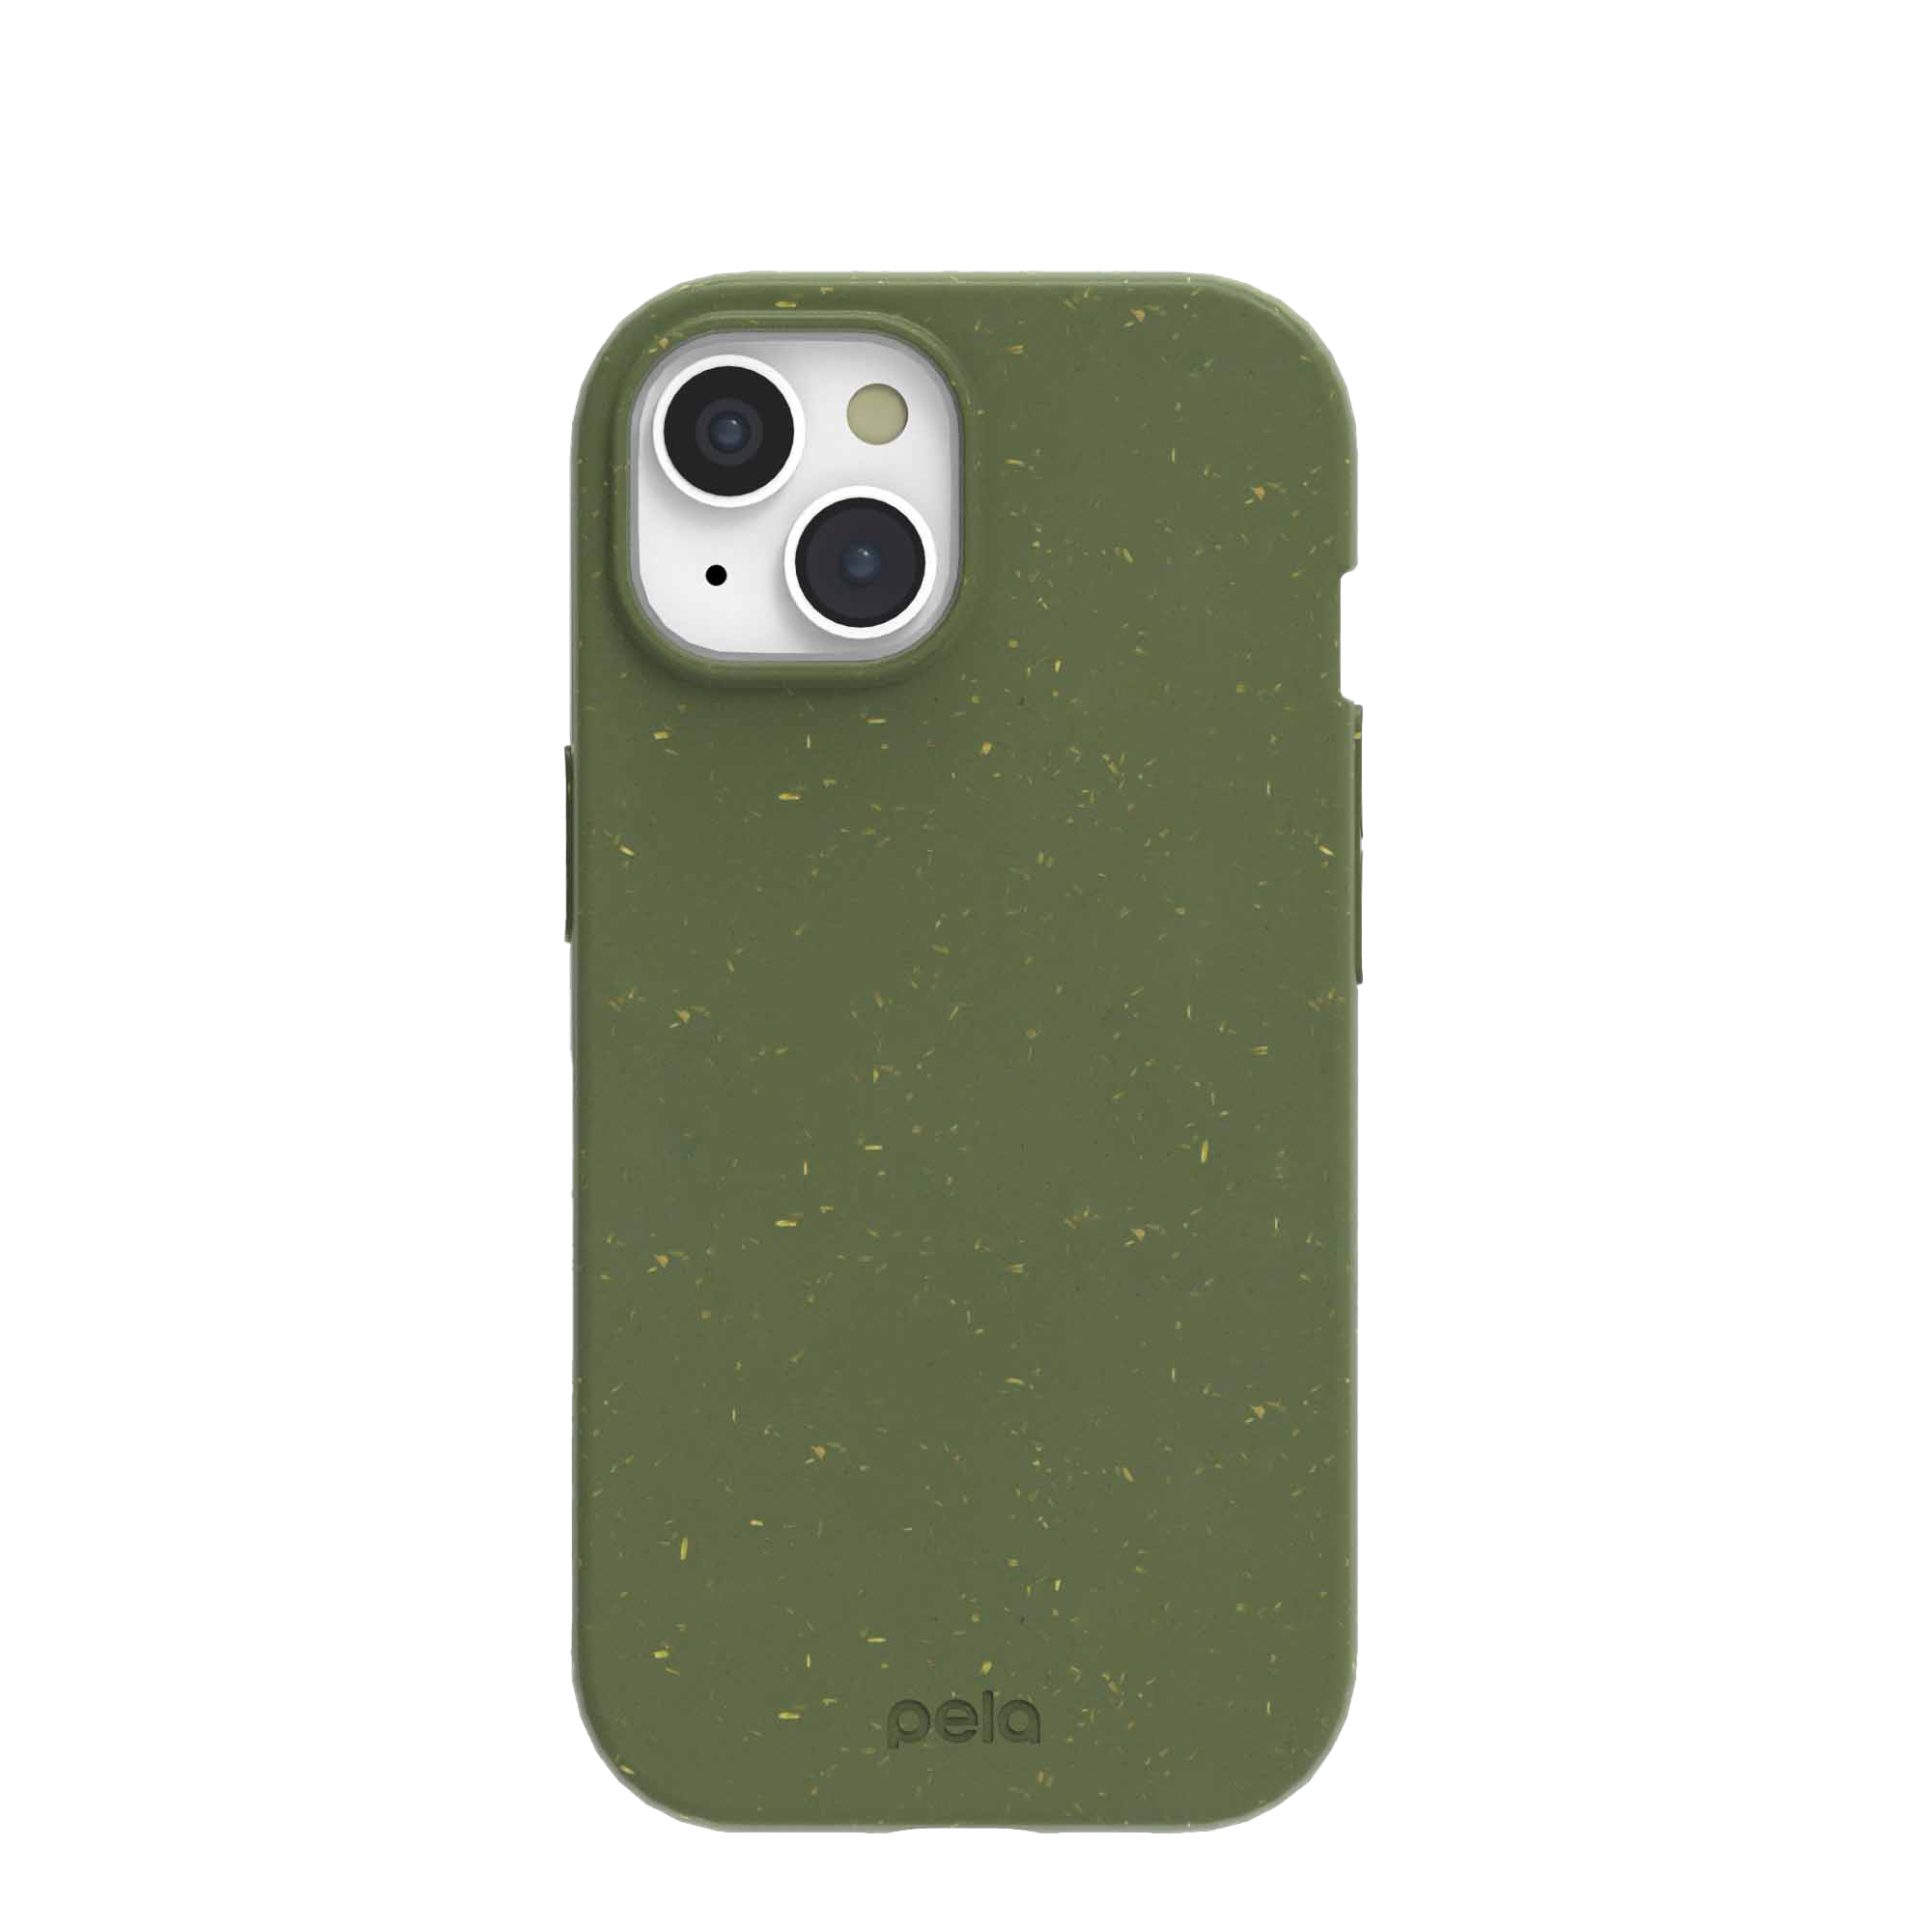 Green eco-friendly phone case for a smartphone with dual camera cutouts.